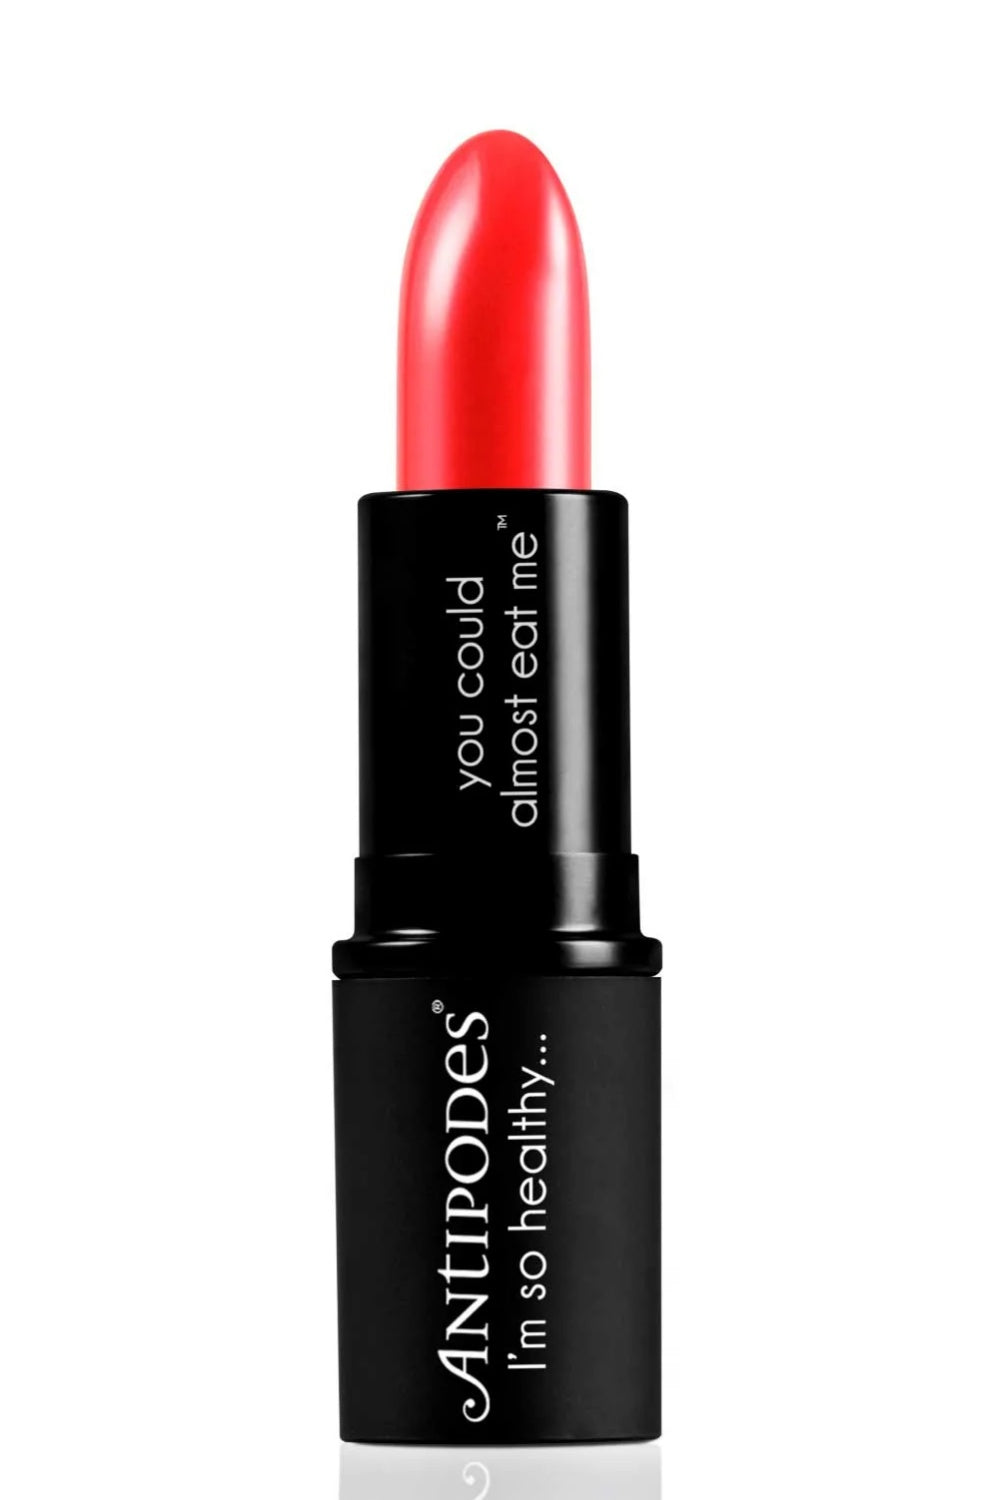 ANTIPODES MOISTURE-BOOST NATURAL LIPSTICK SOUTH PACIFIC CORAL